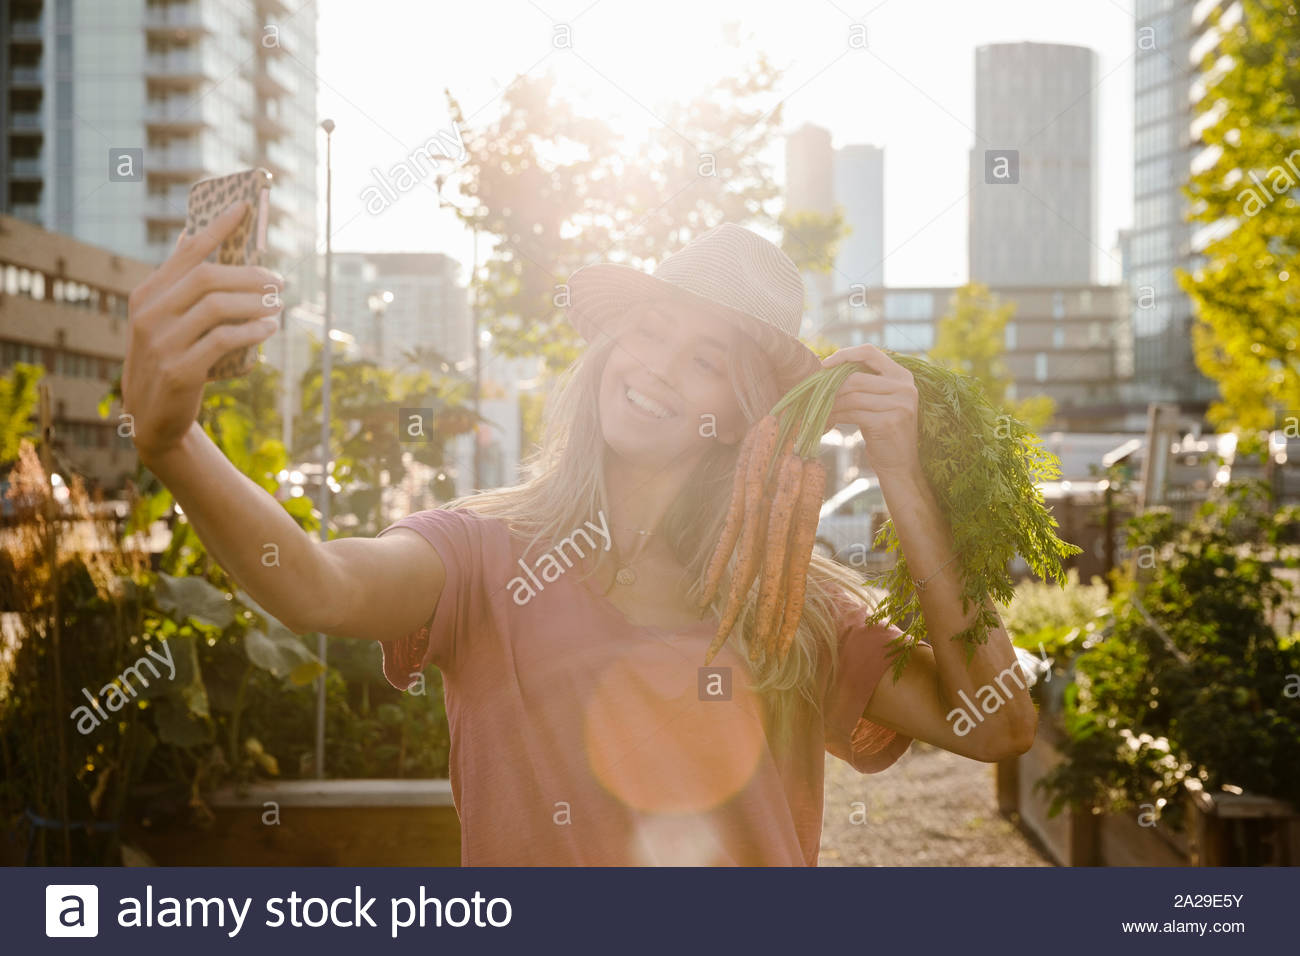 Playful young woman with carrots taking selfie with camera phone in sunny, urban community garden Stock Photo